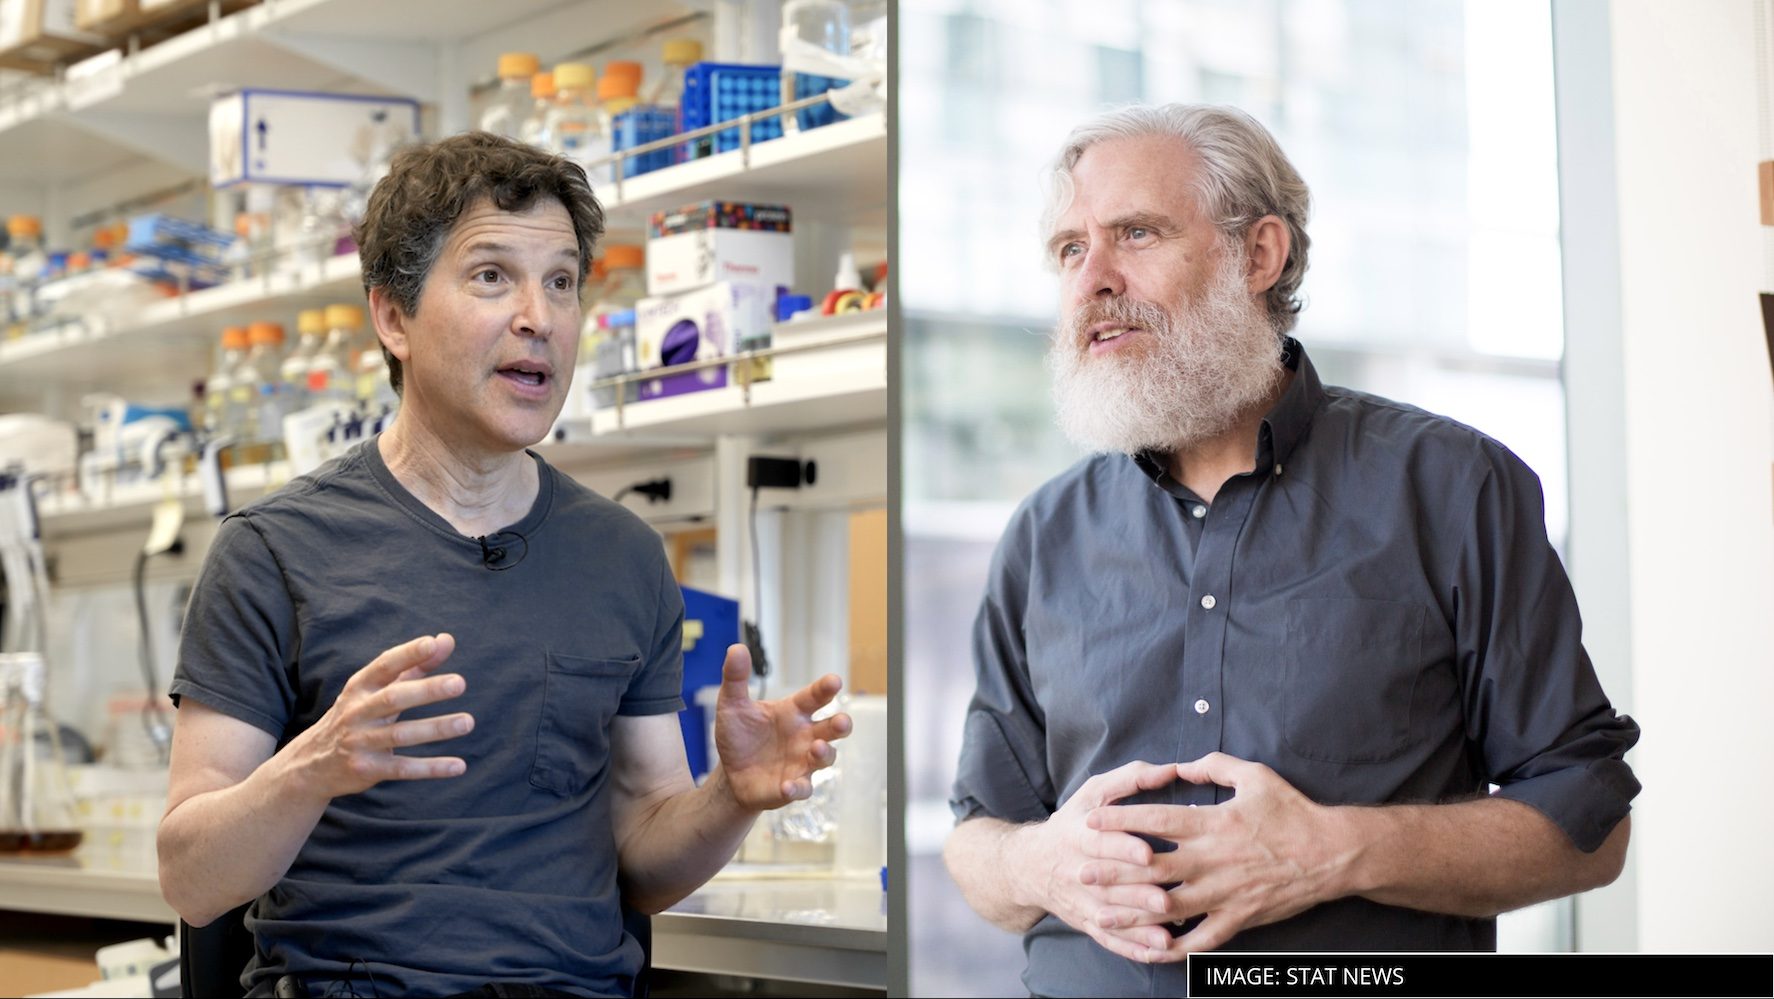 David Baker and George Church call for enhanced controls on DNA synthesis